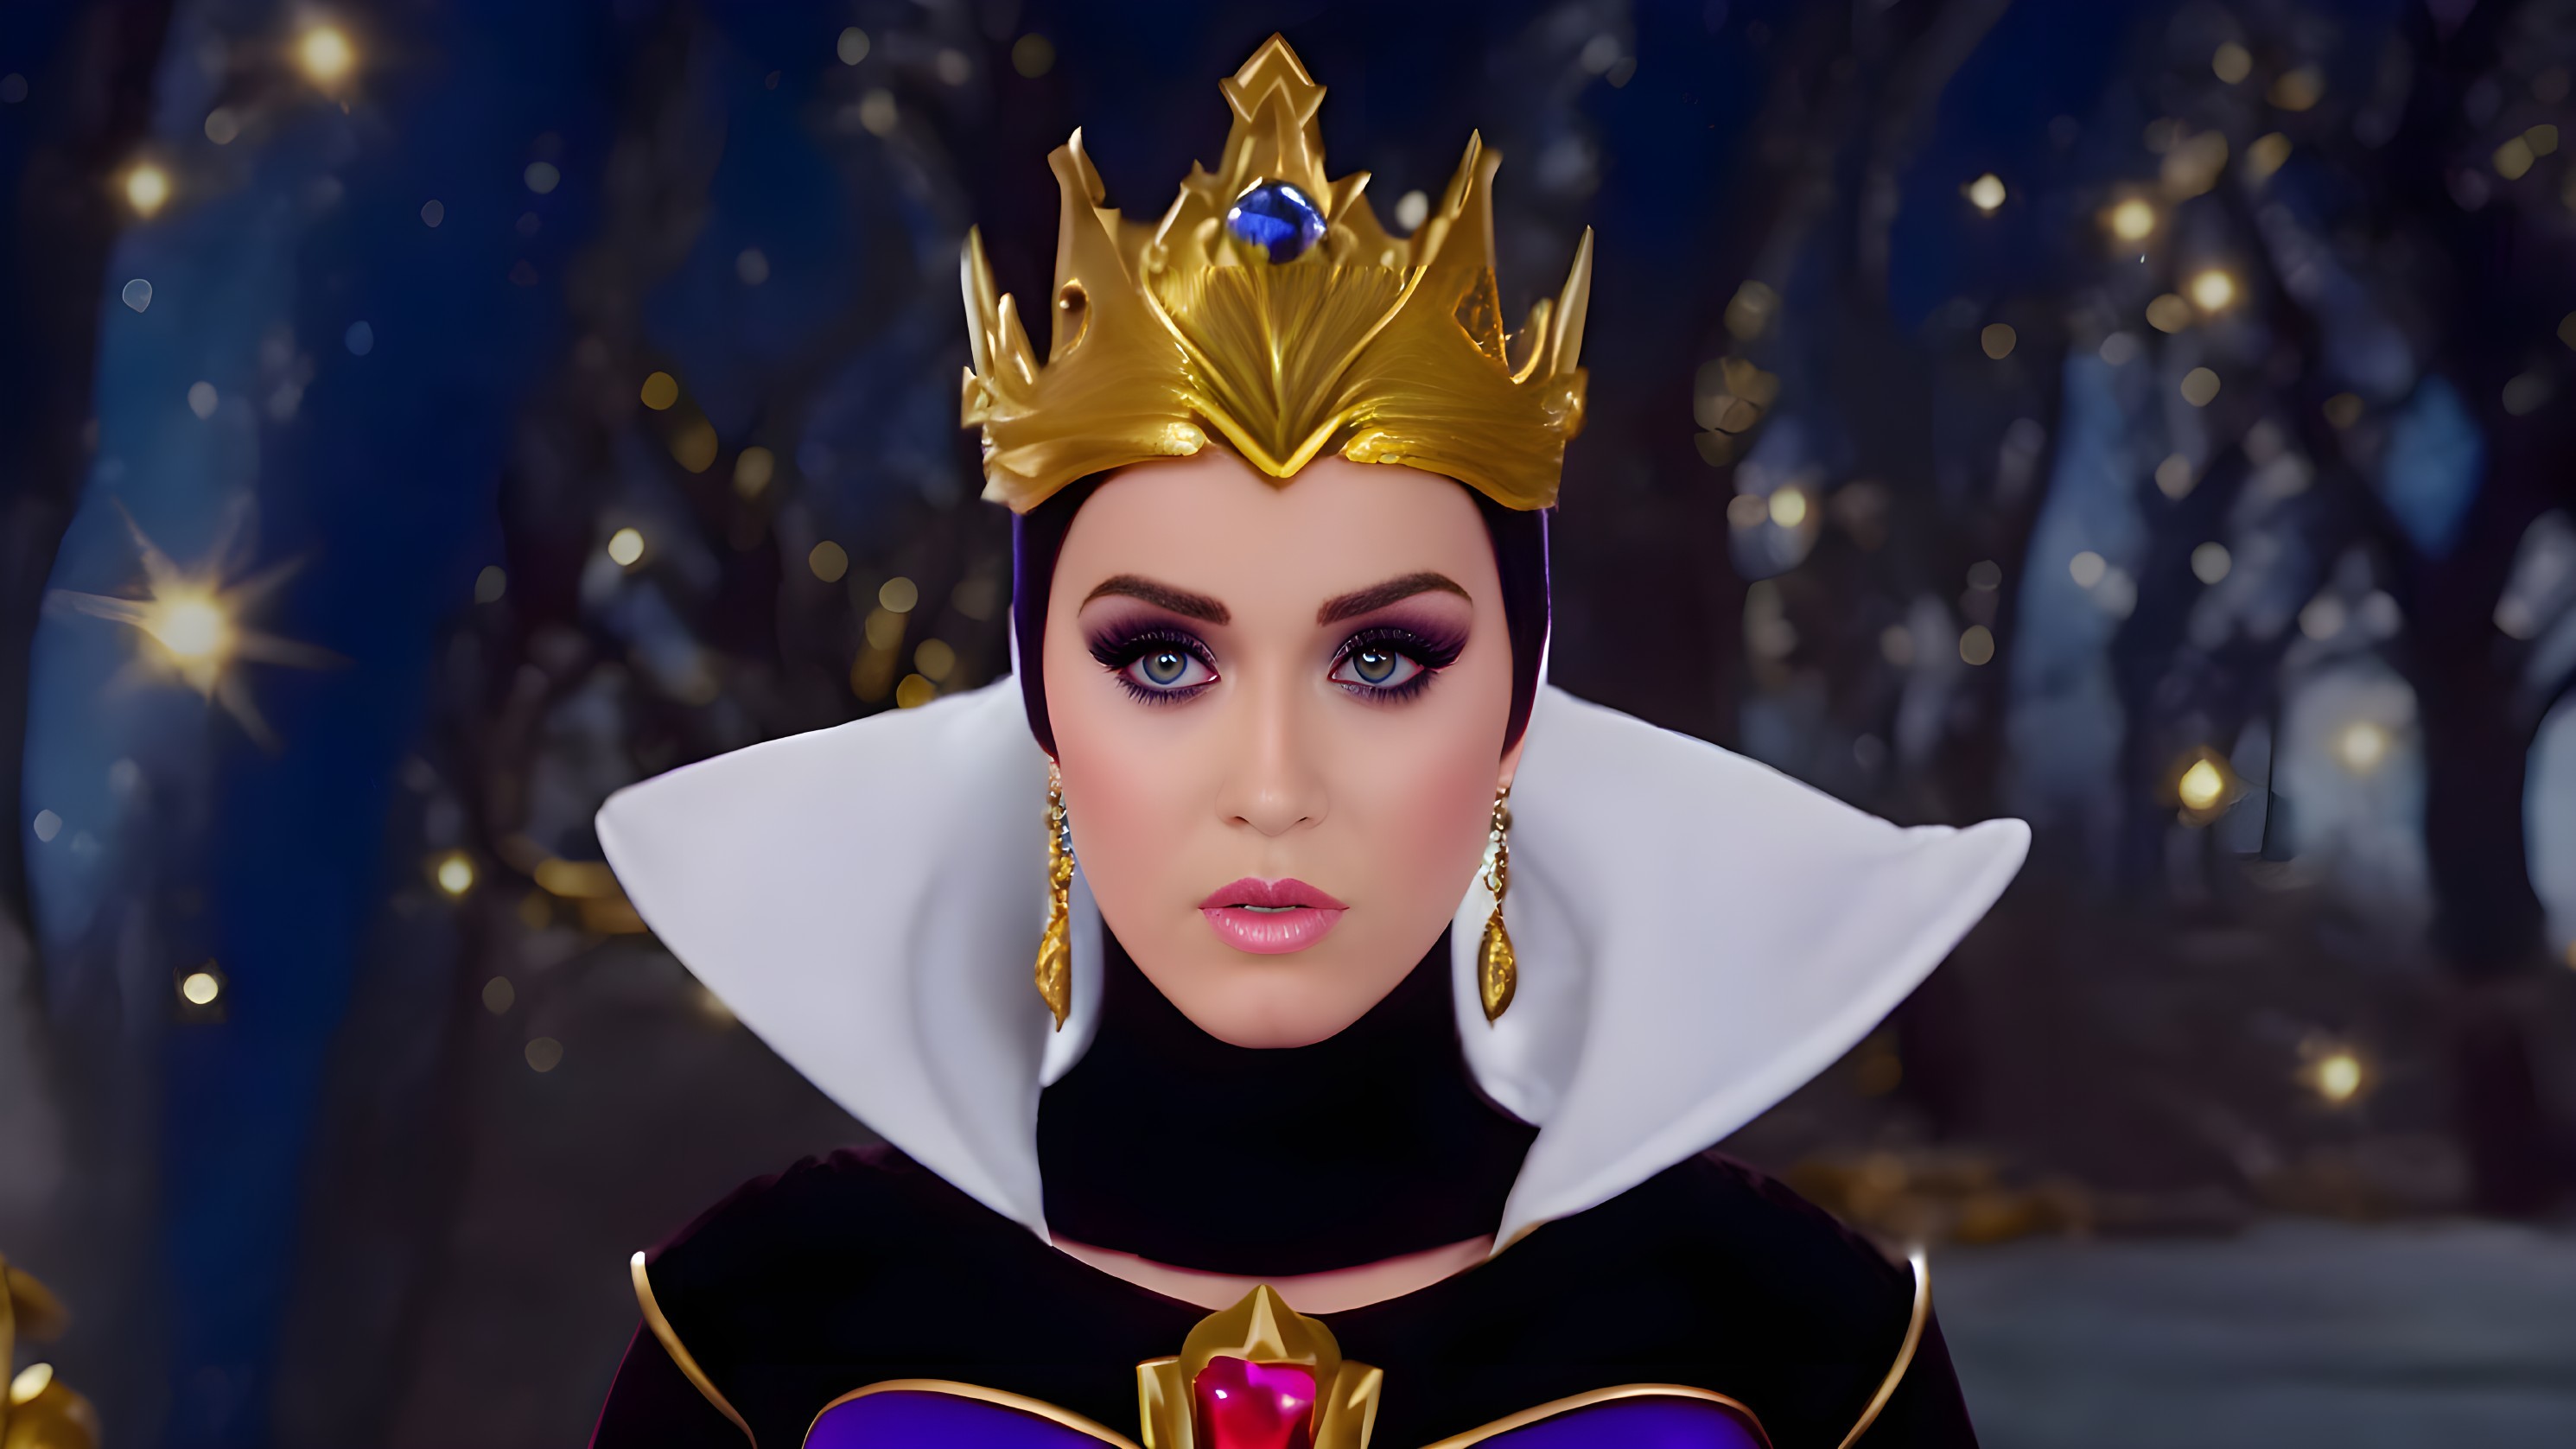 ANDRE´S ART KATY PERRY AS PRINCESS EVIL QUEEN